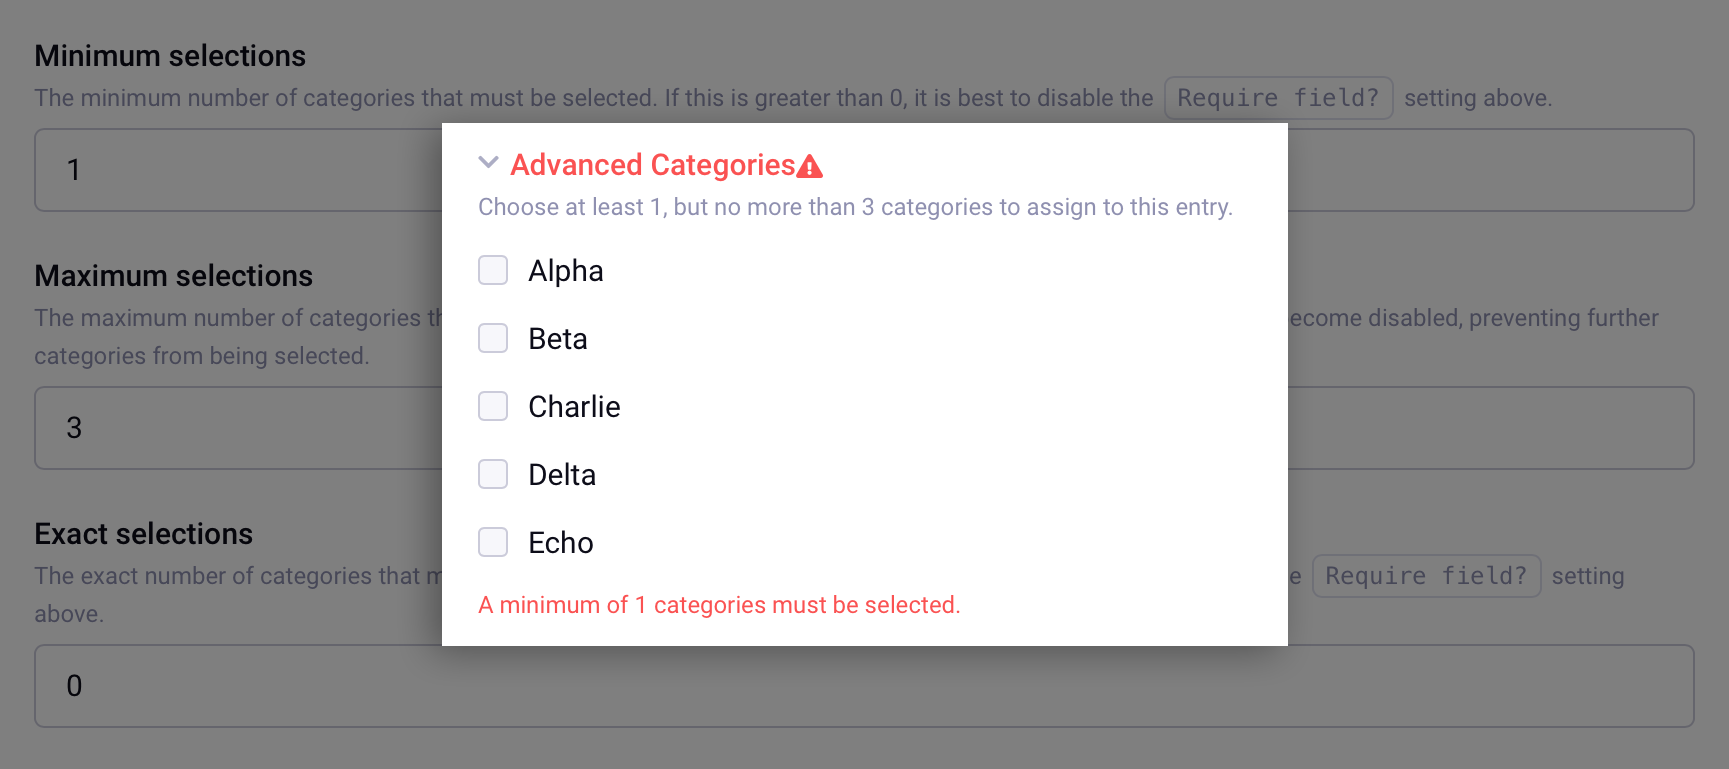 You can select categories from multiple groups, set the field as required, and limit it to a single category selection.